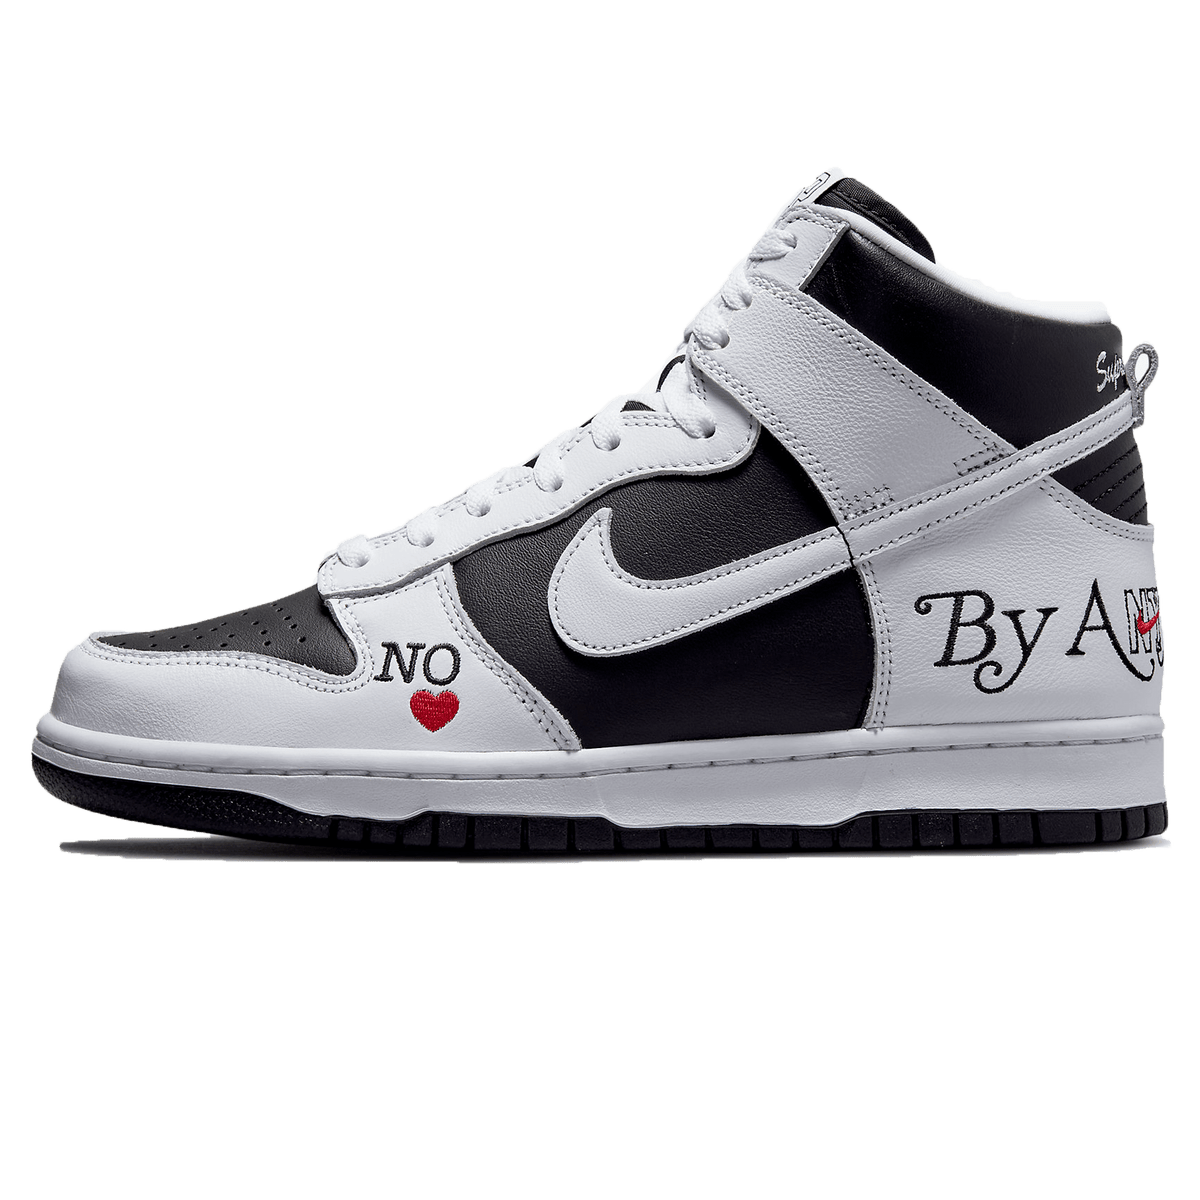 Supreme x Nike Dunk High SB 'By Any Means - Stormtrooper' - JuzsportsShops